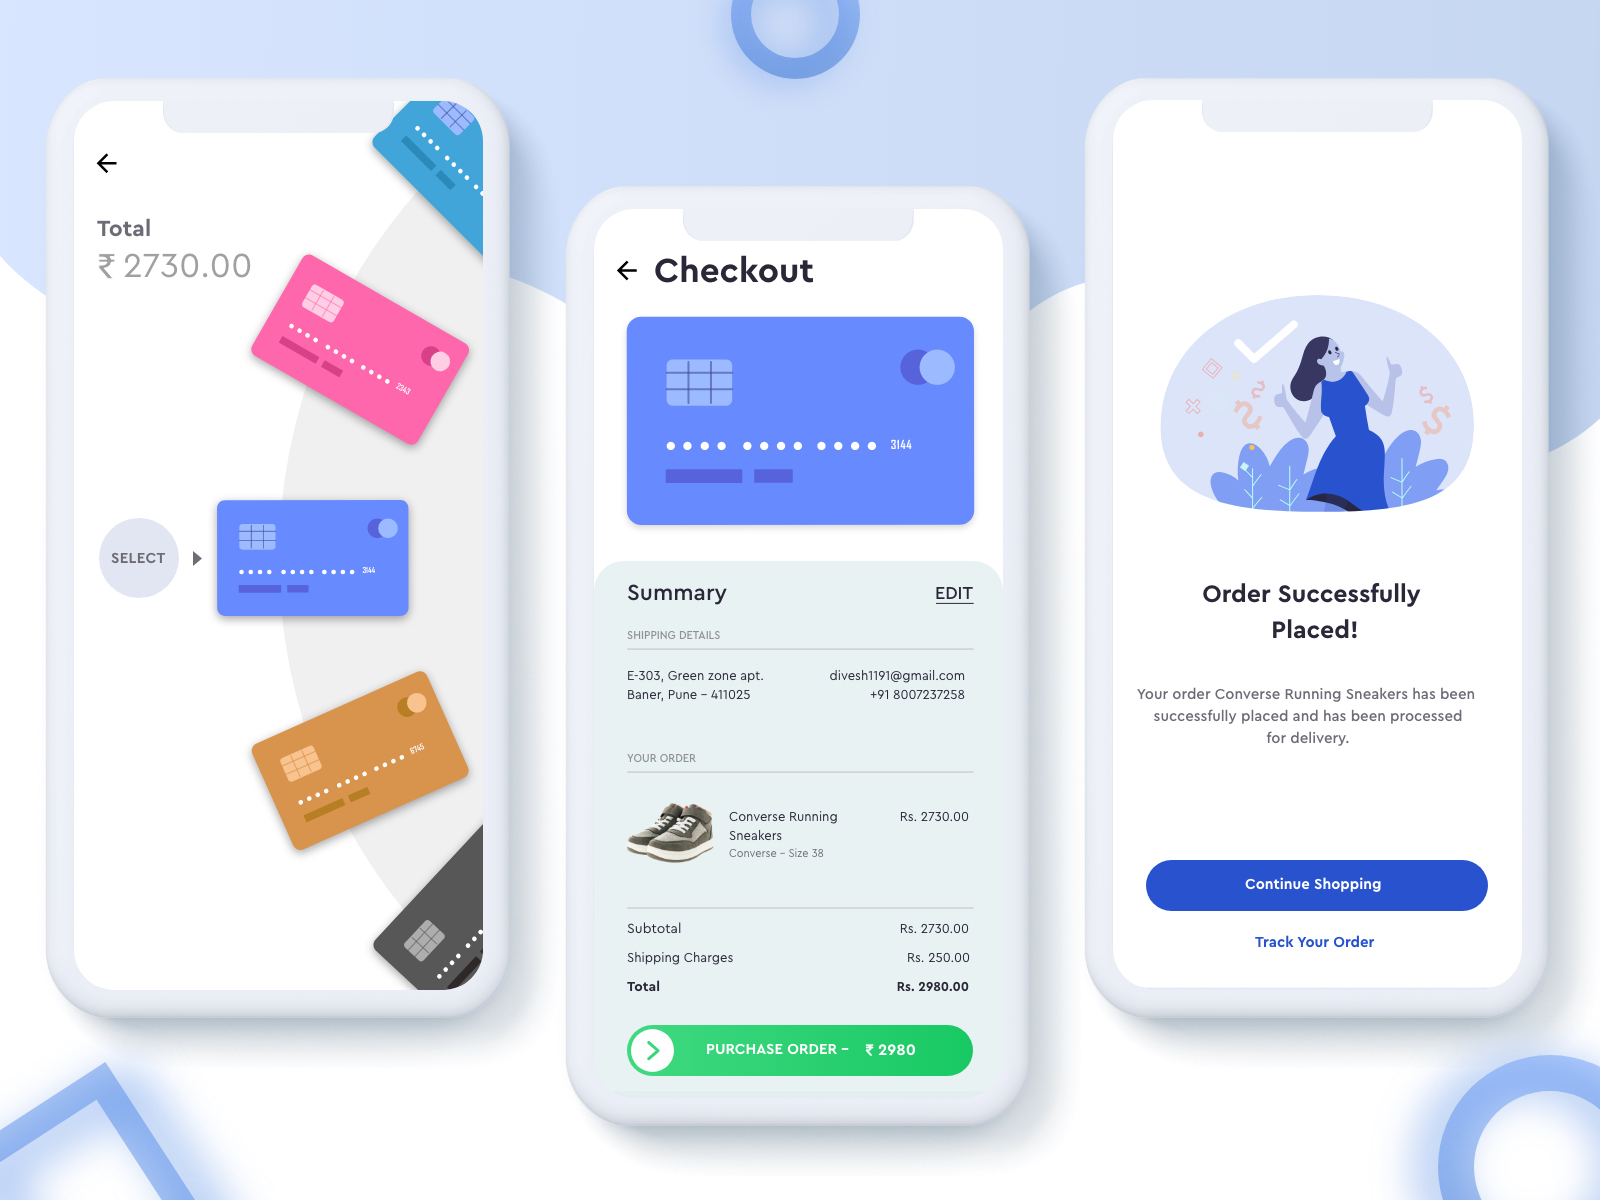 Checkout Page using Credit Cards for Shopping by Divesh Borse on Dribbble